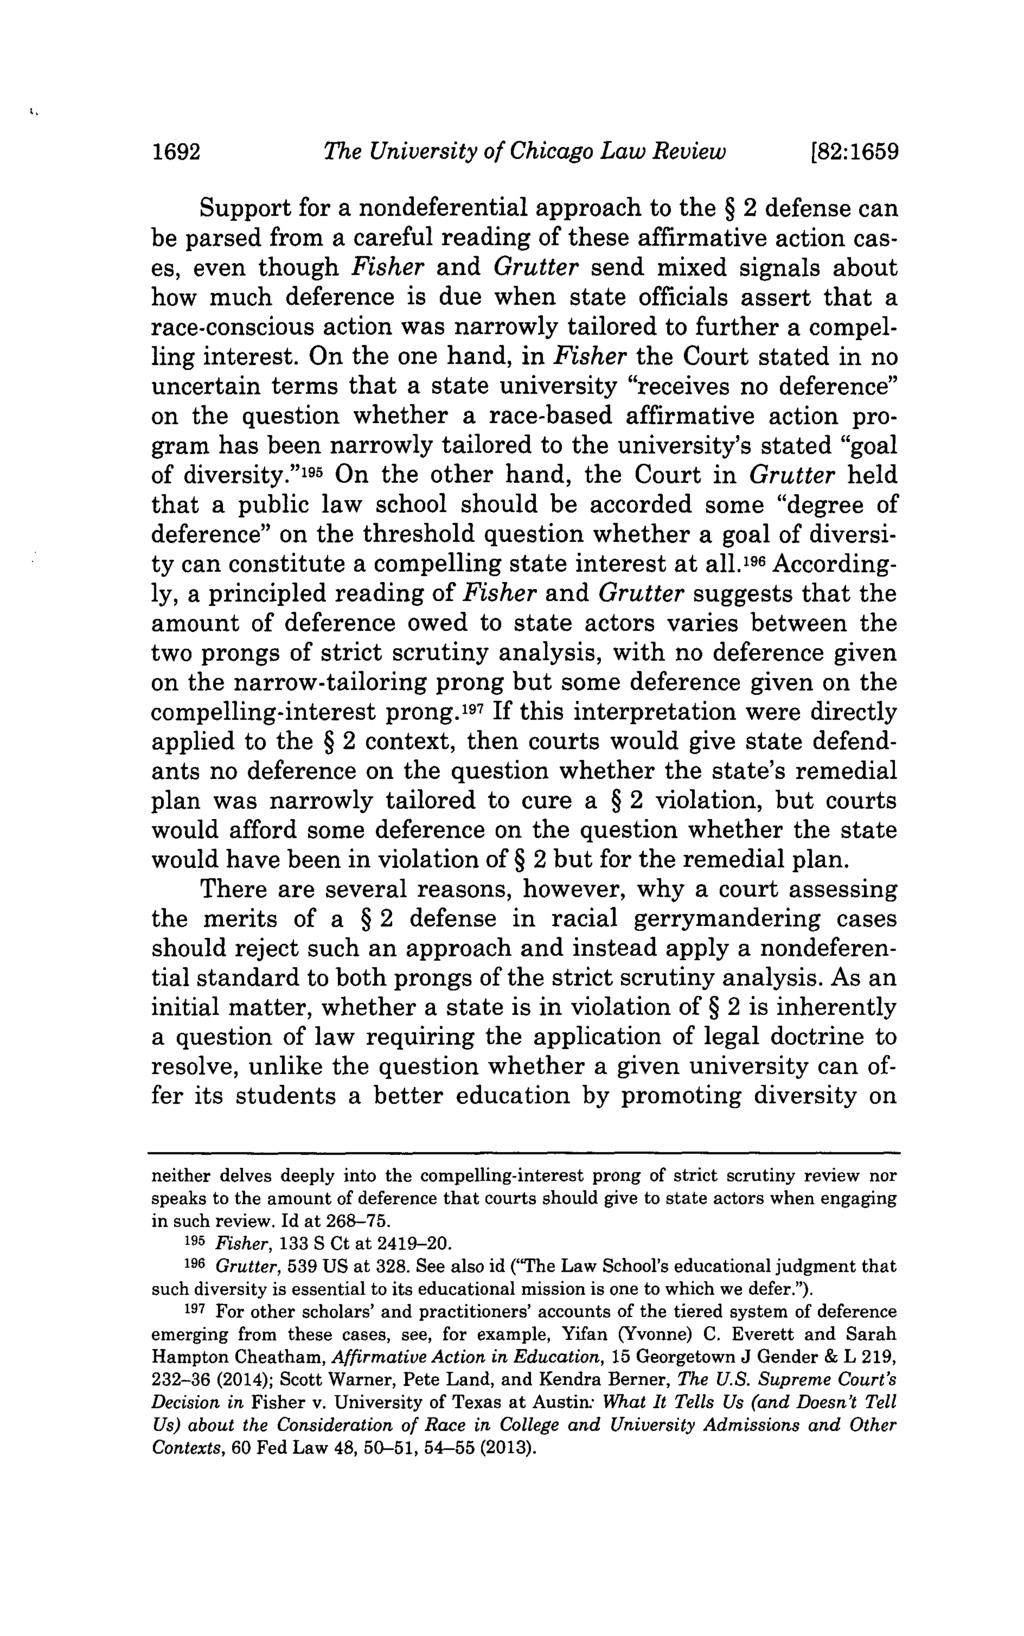 1692 The University of Chicago Law Review [82:1659 Support for a nondeferential approach to the 2 defense can be parsed from a careful reading of these affirmative action cases, even though Fisher